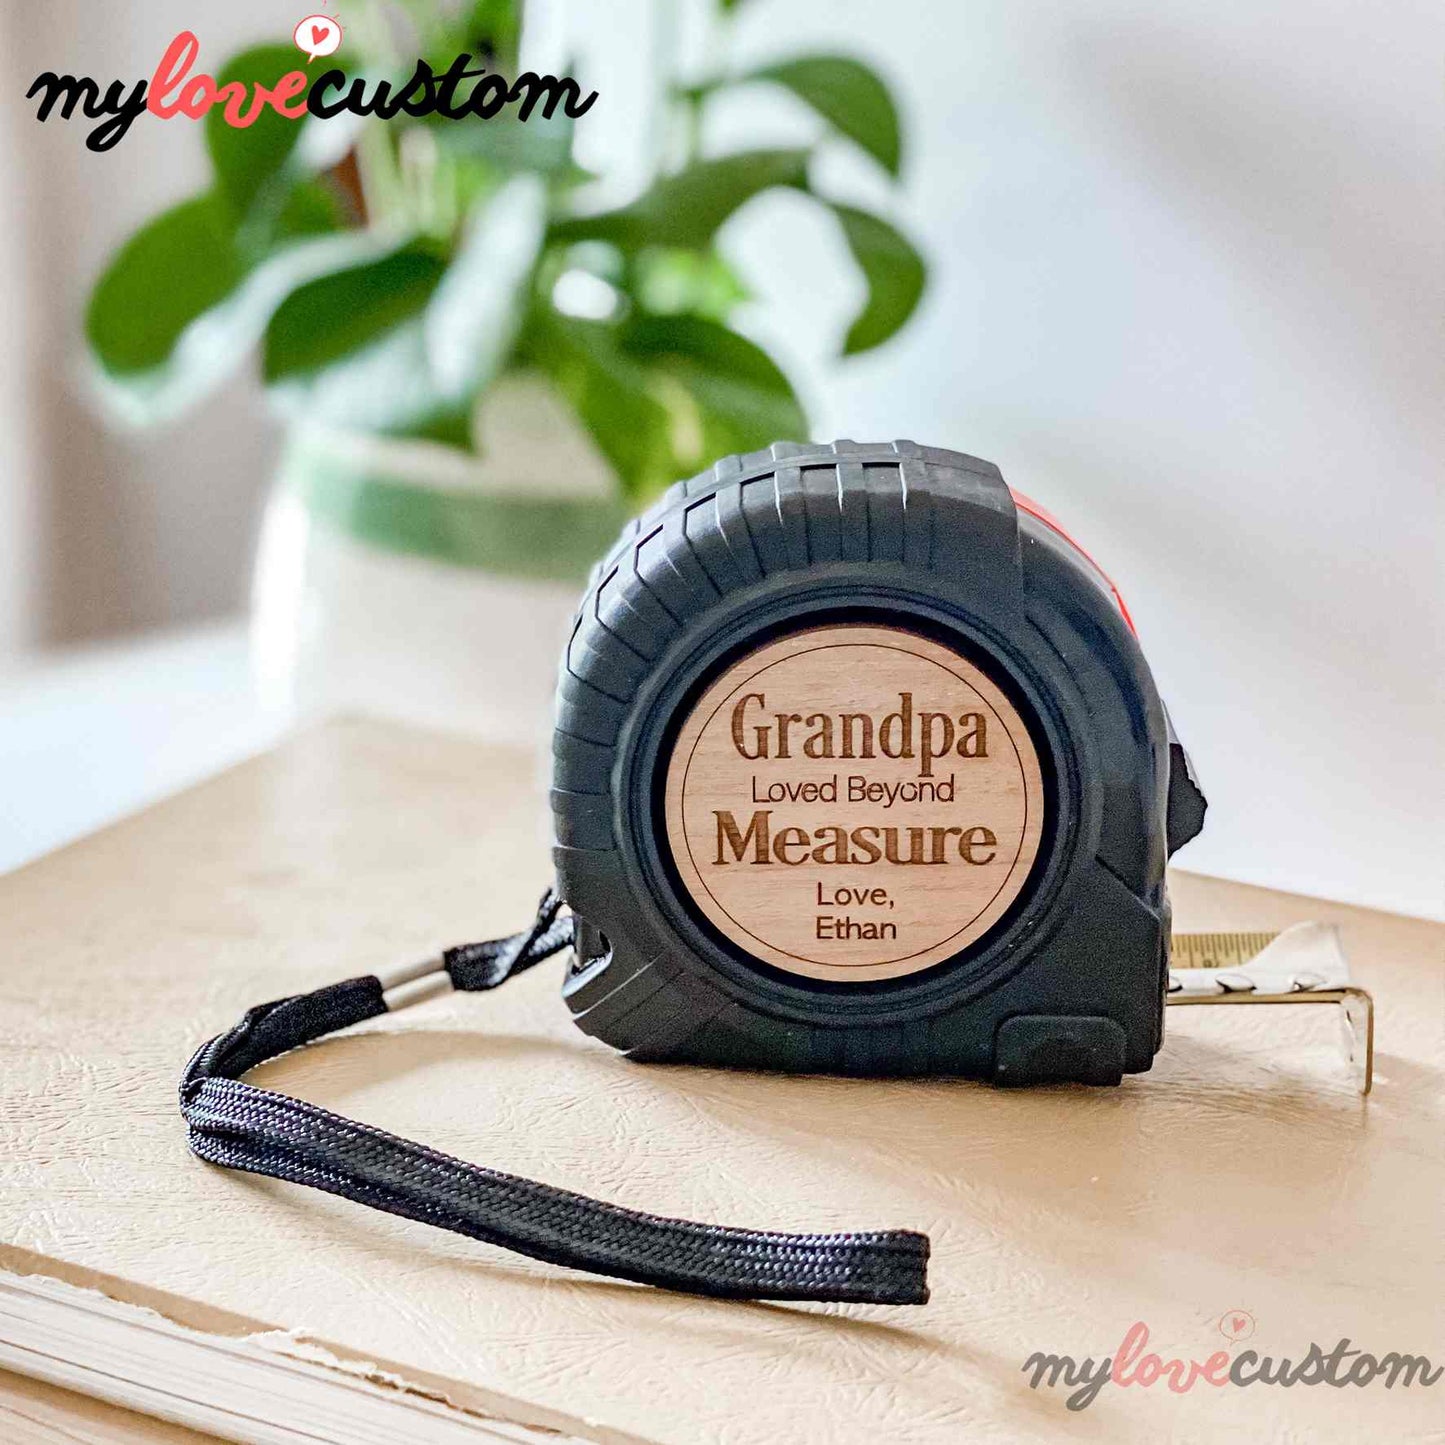 Ugifts™ Personalized Tape Measure Hammer Set - Best Gift For Father's Day